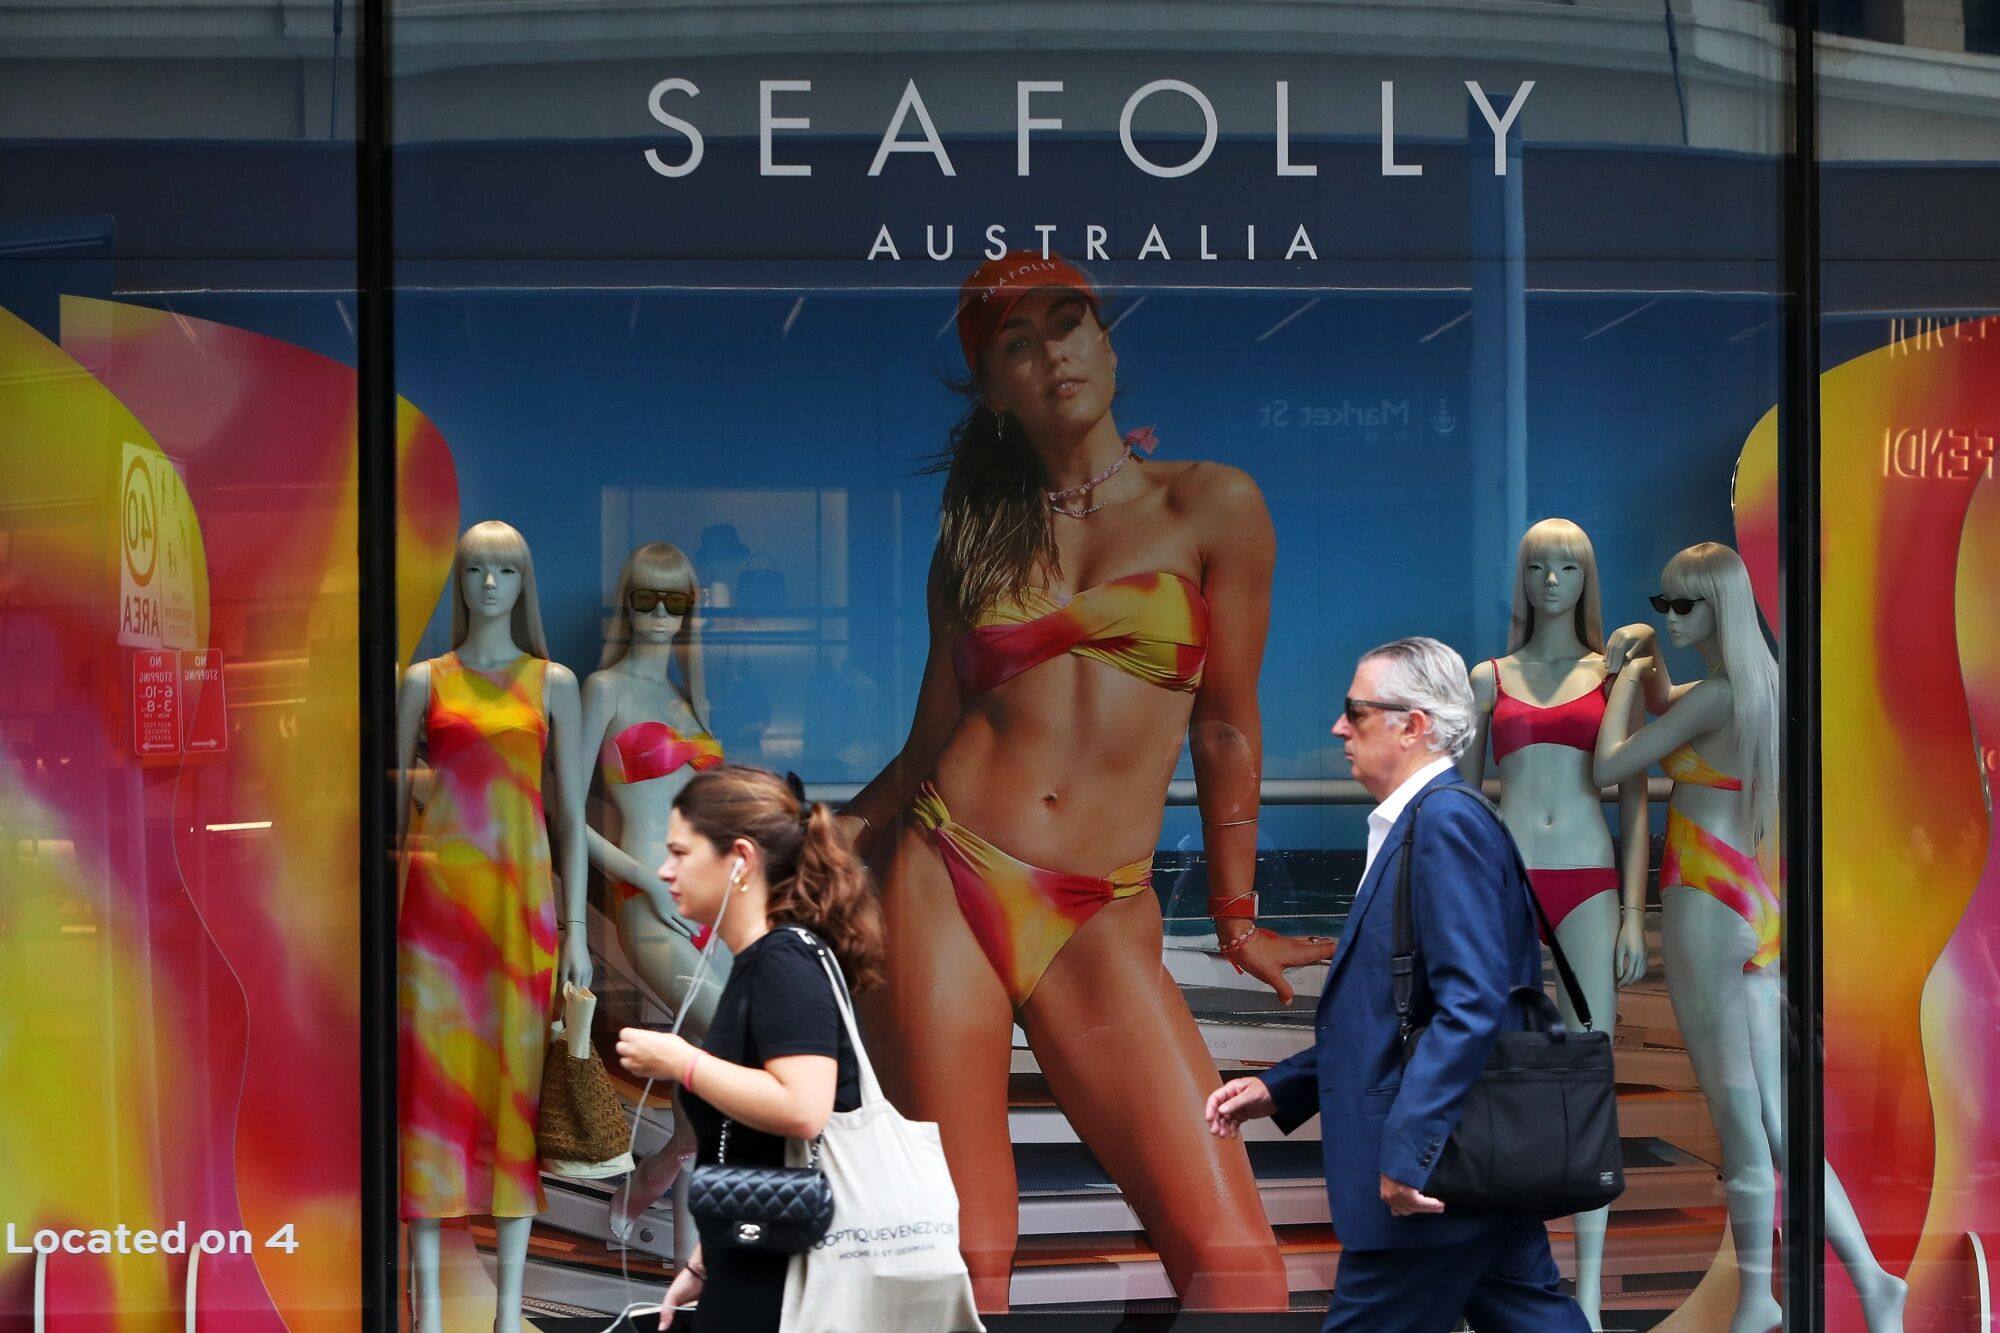 Pedestrians pass a Seafolly store in the central business district in Sydney on February 6. Australia’s central bank kept interest rates unchanged at its first meeting of a revamped policy schedule and signalled further tightening remains possible, sending the currency and bond yields higher. Photo: Bloomberg